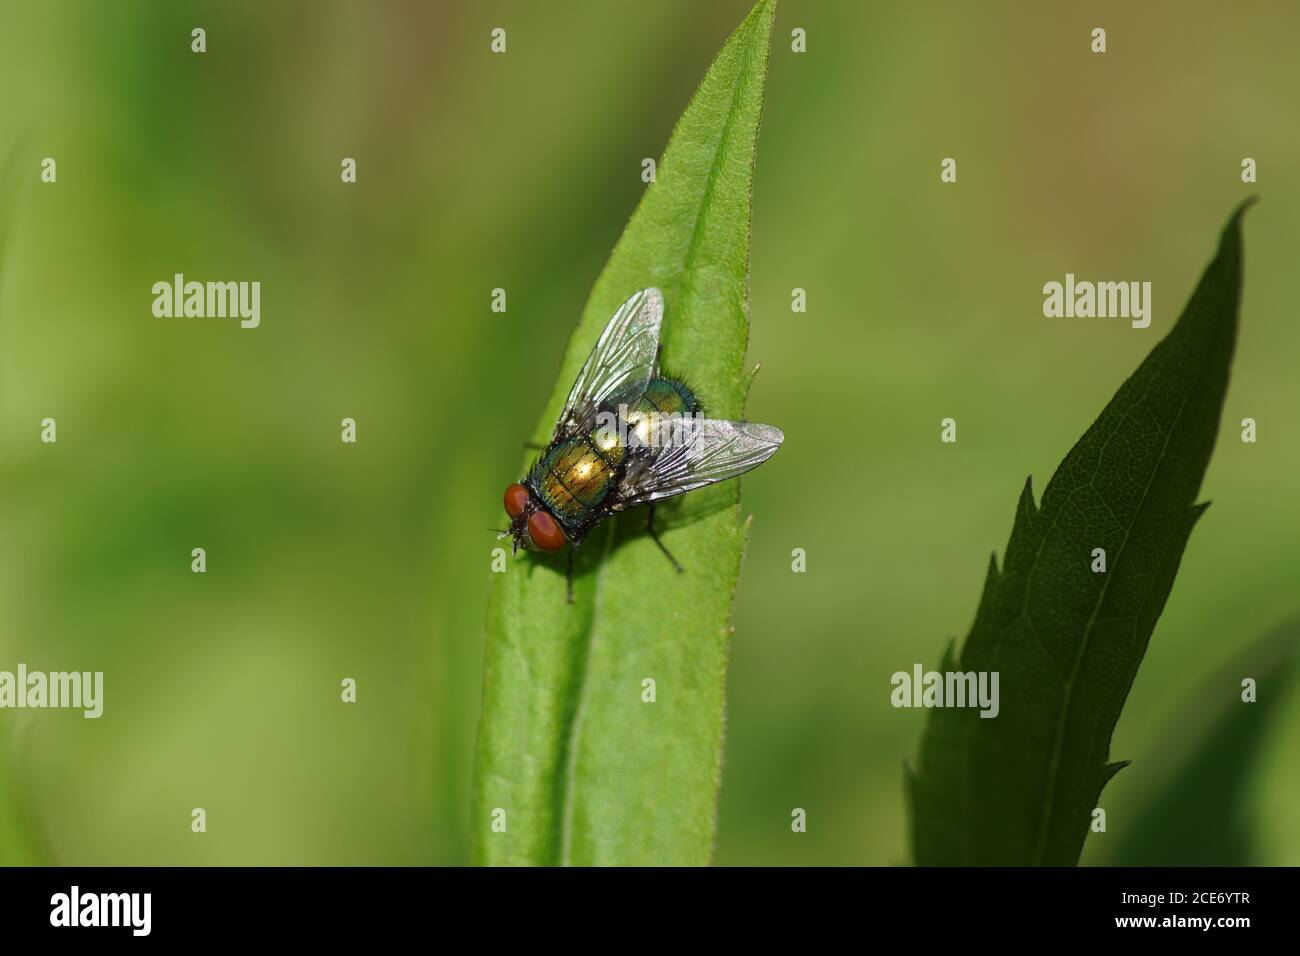 A green bottle fly (Lucilia) of the family blow flies, Calliphoridae on a leaf. Netherlands, June Stock Photo